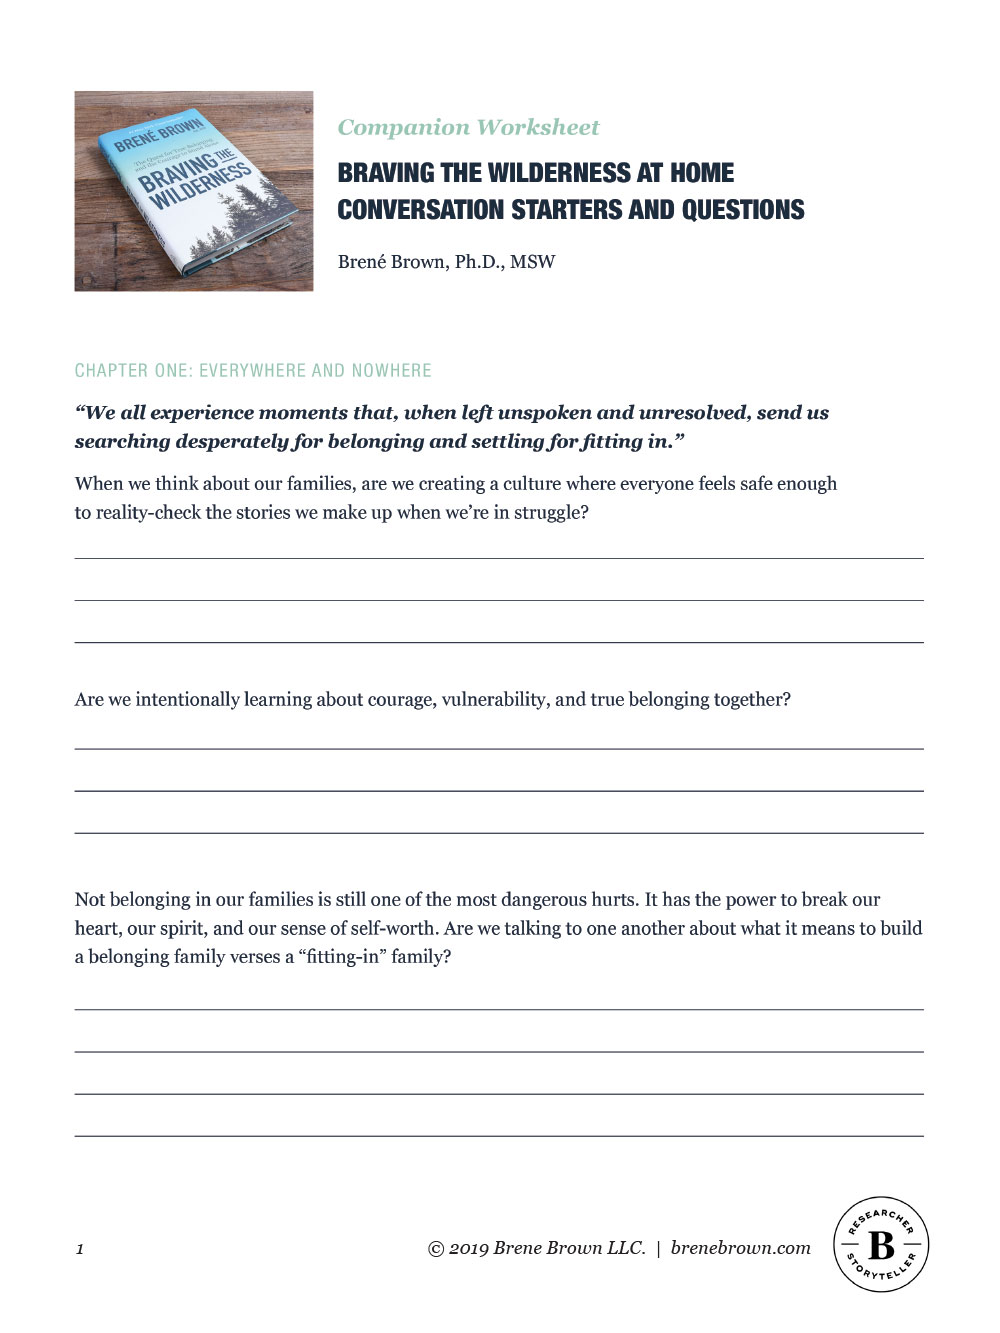 A worksheet of at home conversation starters and questions for Braving the Wilderness